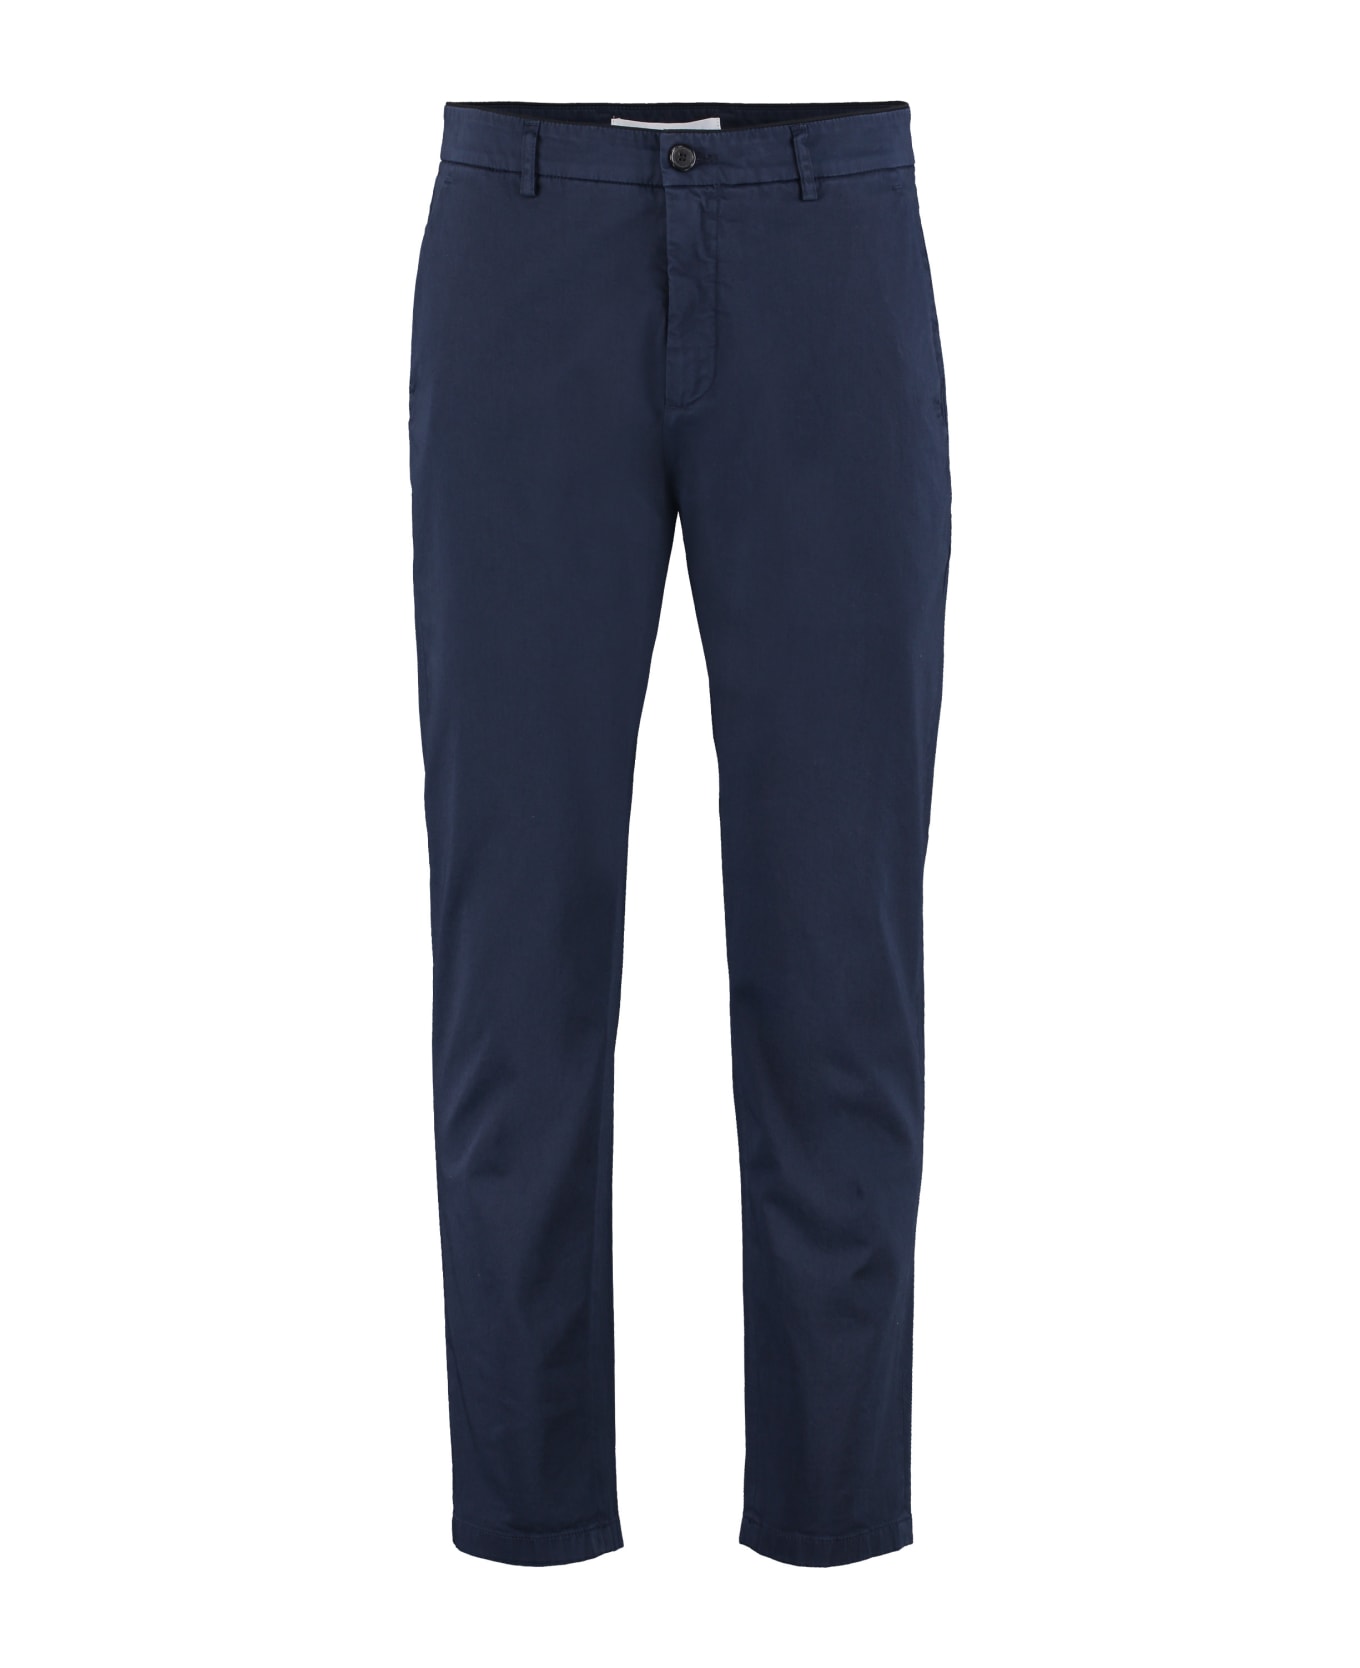 Department Five Prince Stretch Cotton Chino Trousers - blue ボトムス